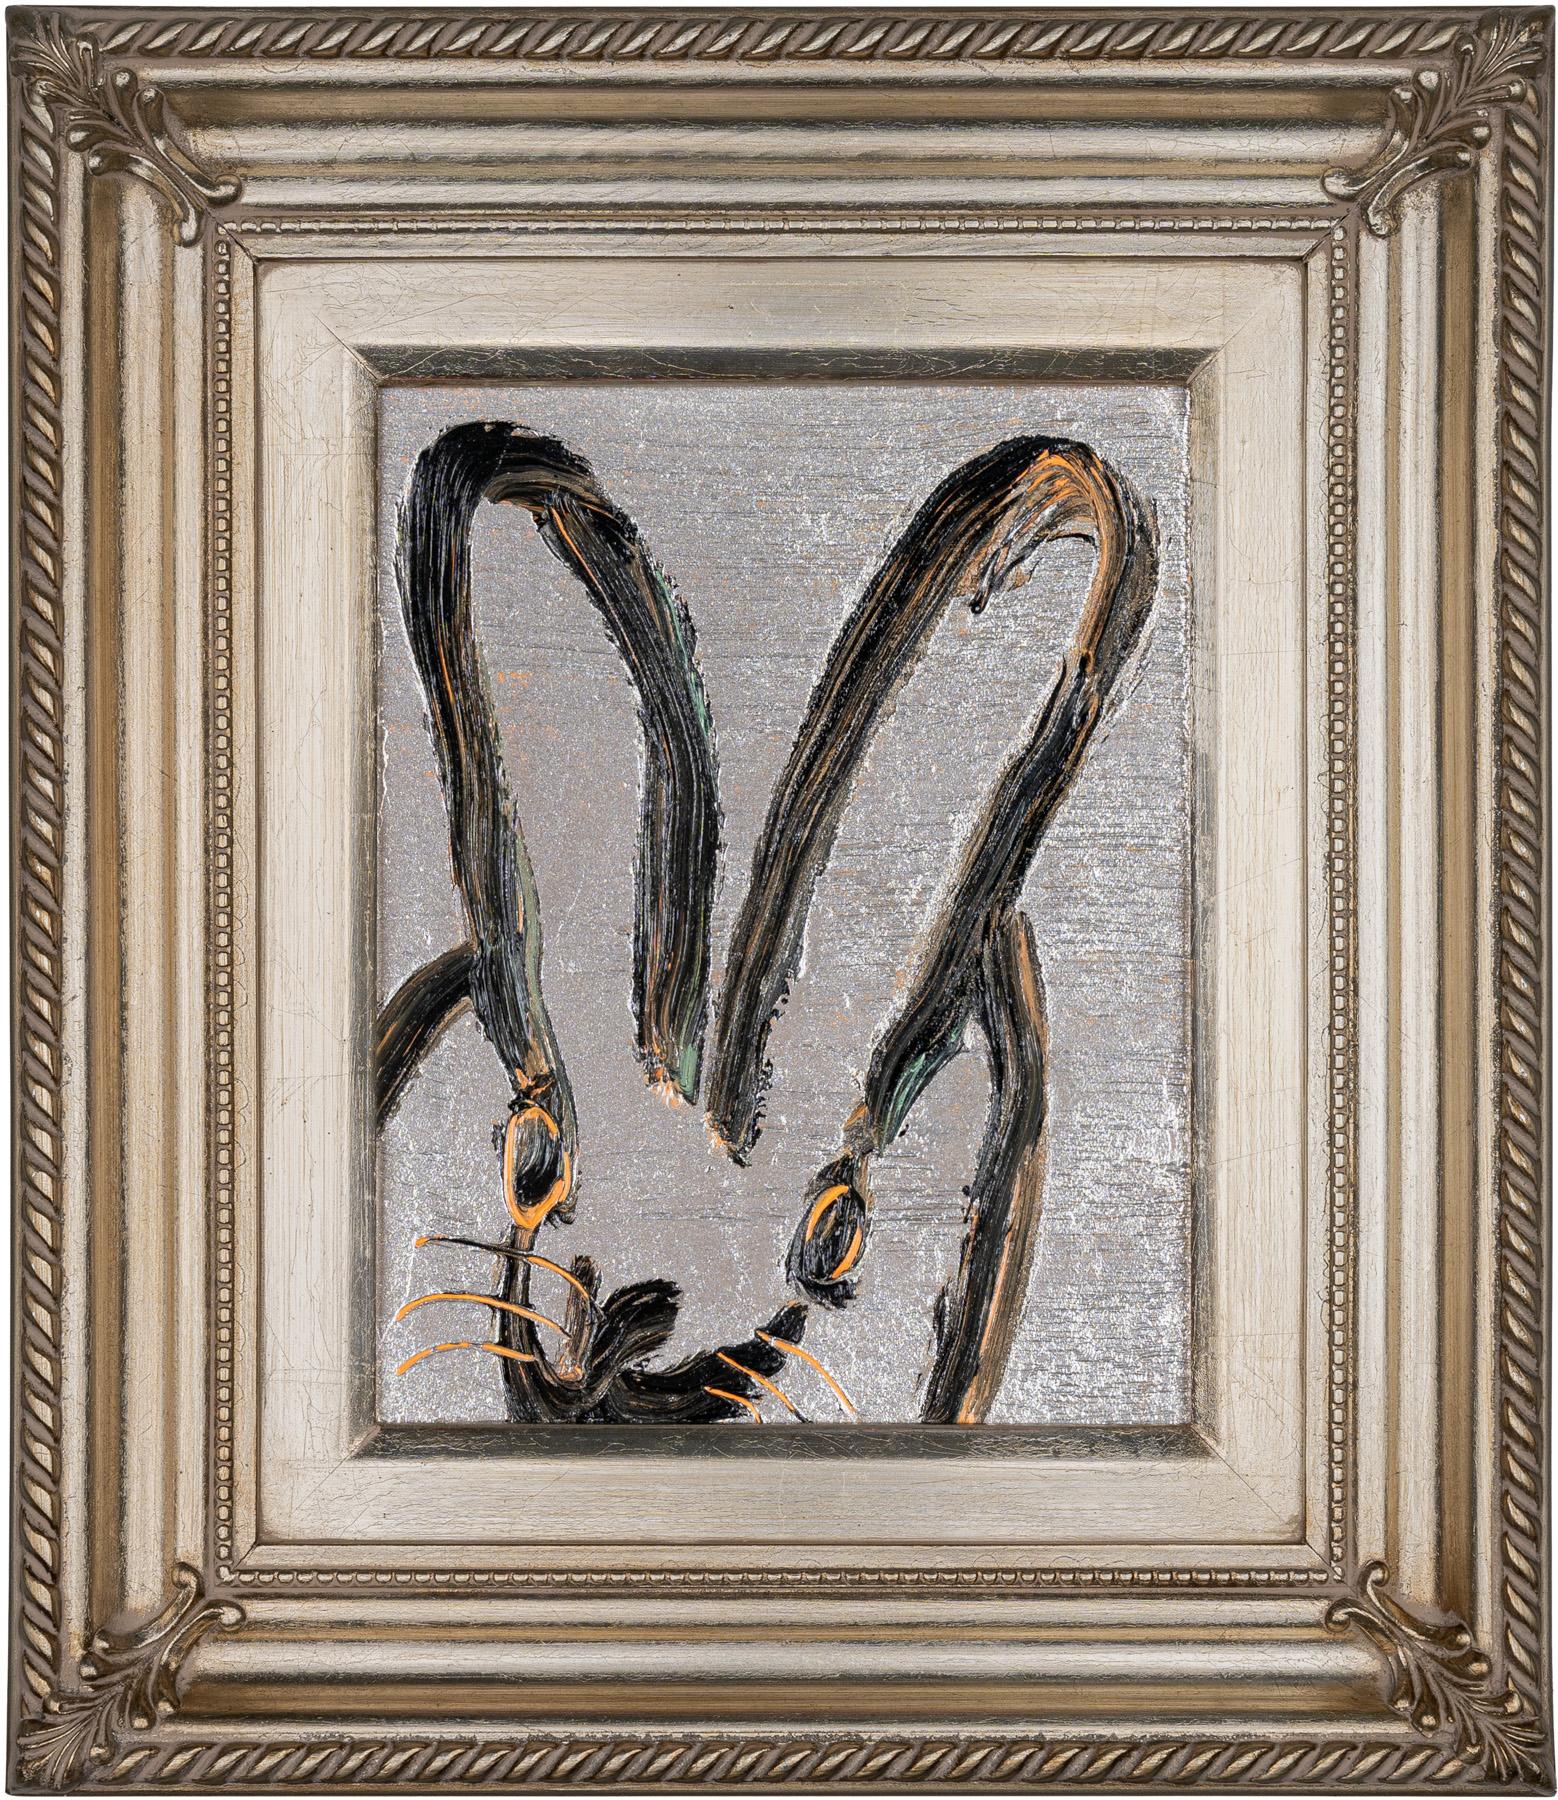 Hunt Slonem bunny oil painting Hunt Slonem bunny oil painting 'Smooch' 2023. Oil on wood, 10 x 8 in. / Frame: 16 x 14 in. This painting features Slonem's signature bunny outlined in black and orange over a silver painted background. Includes a